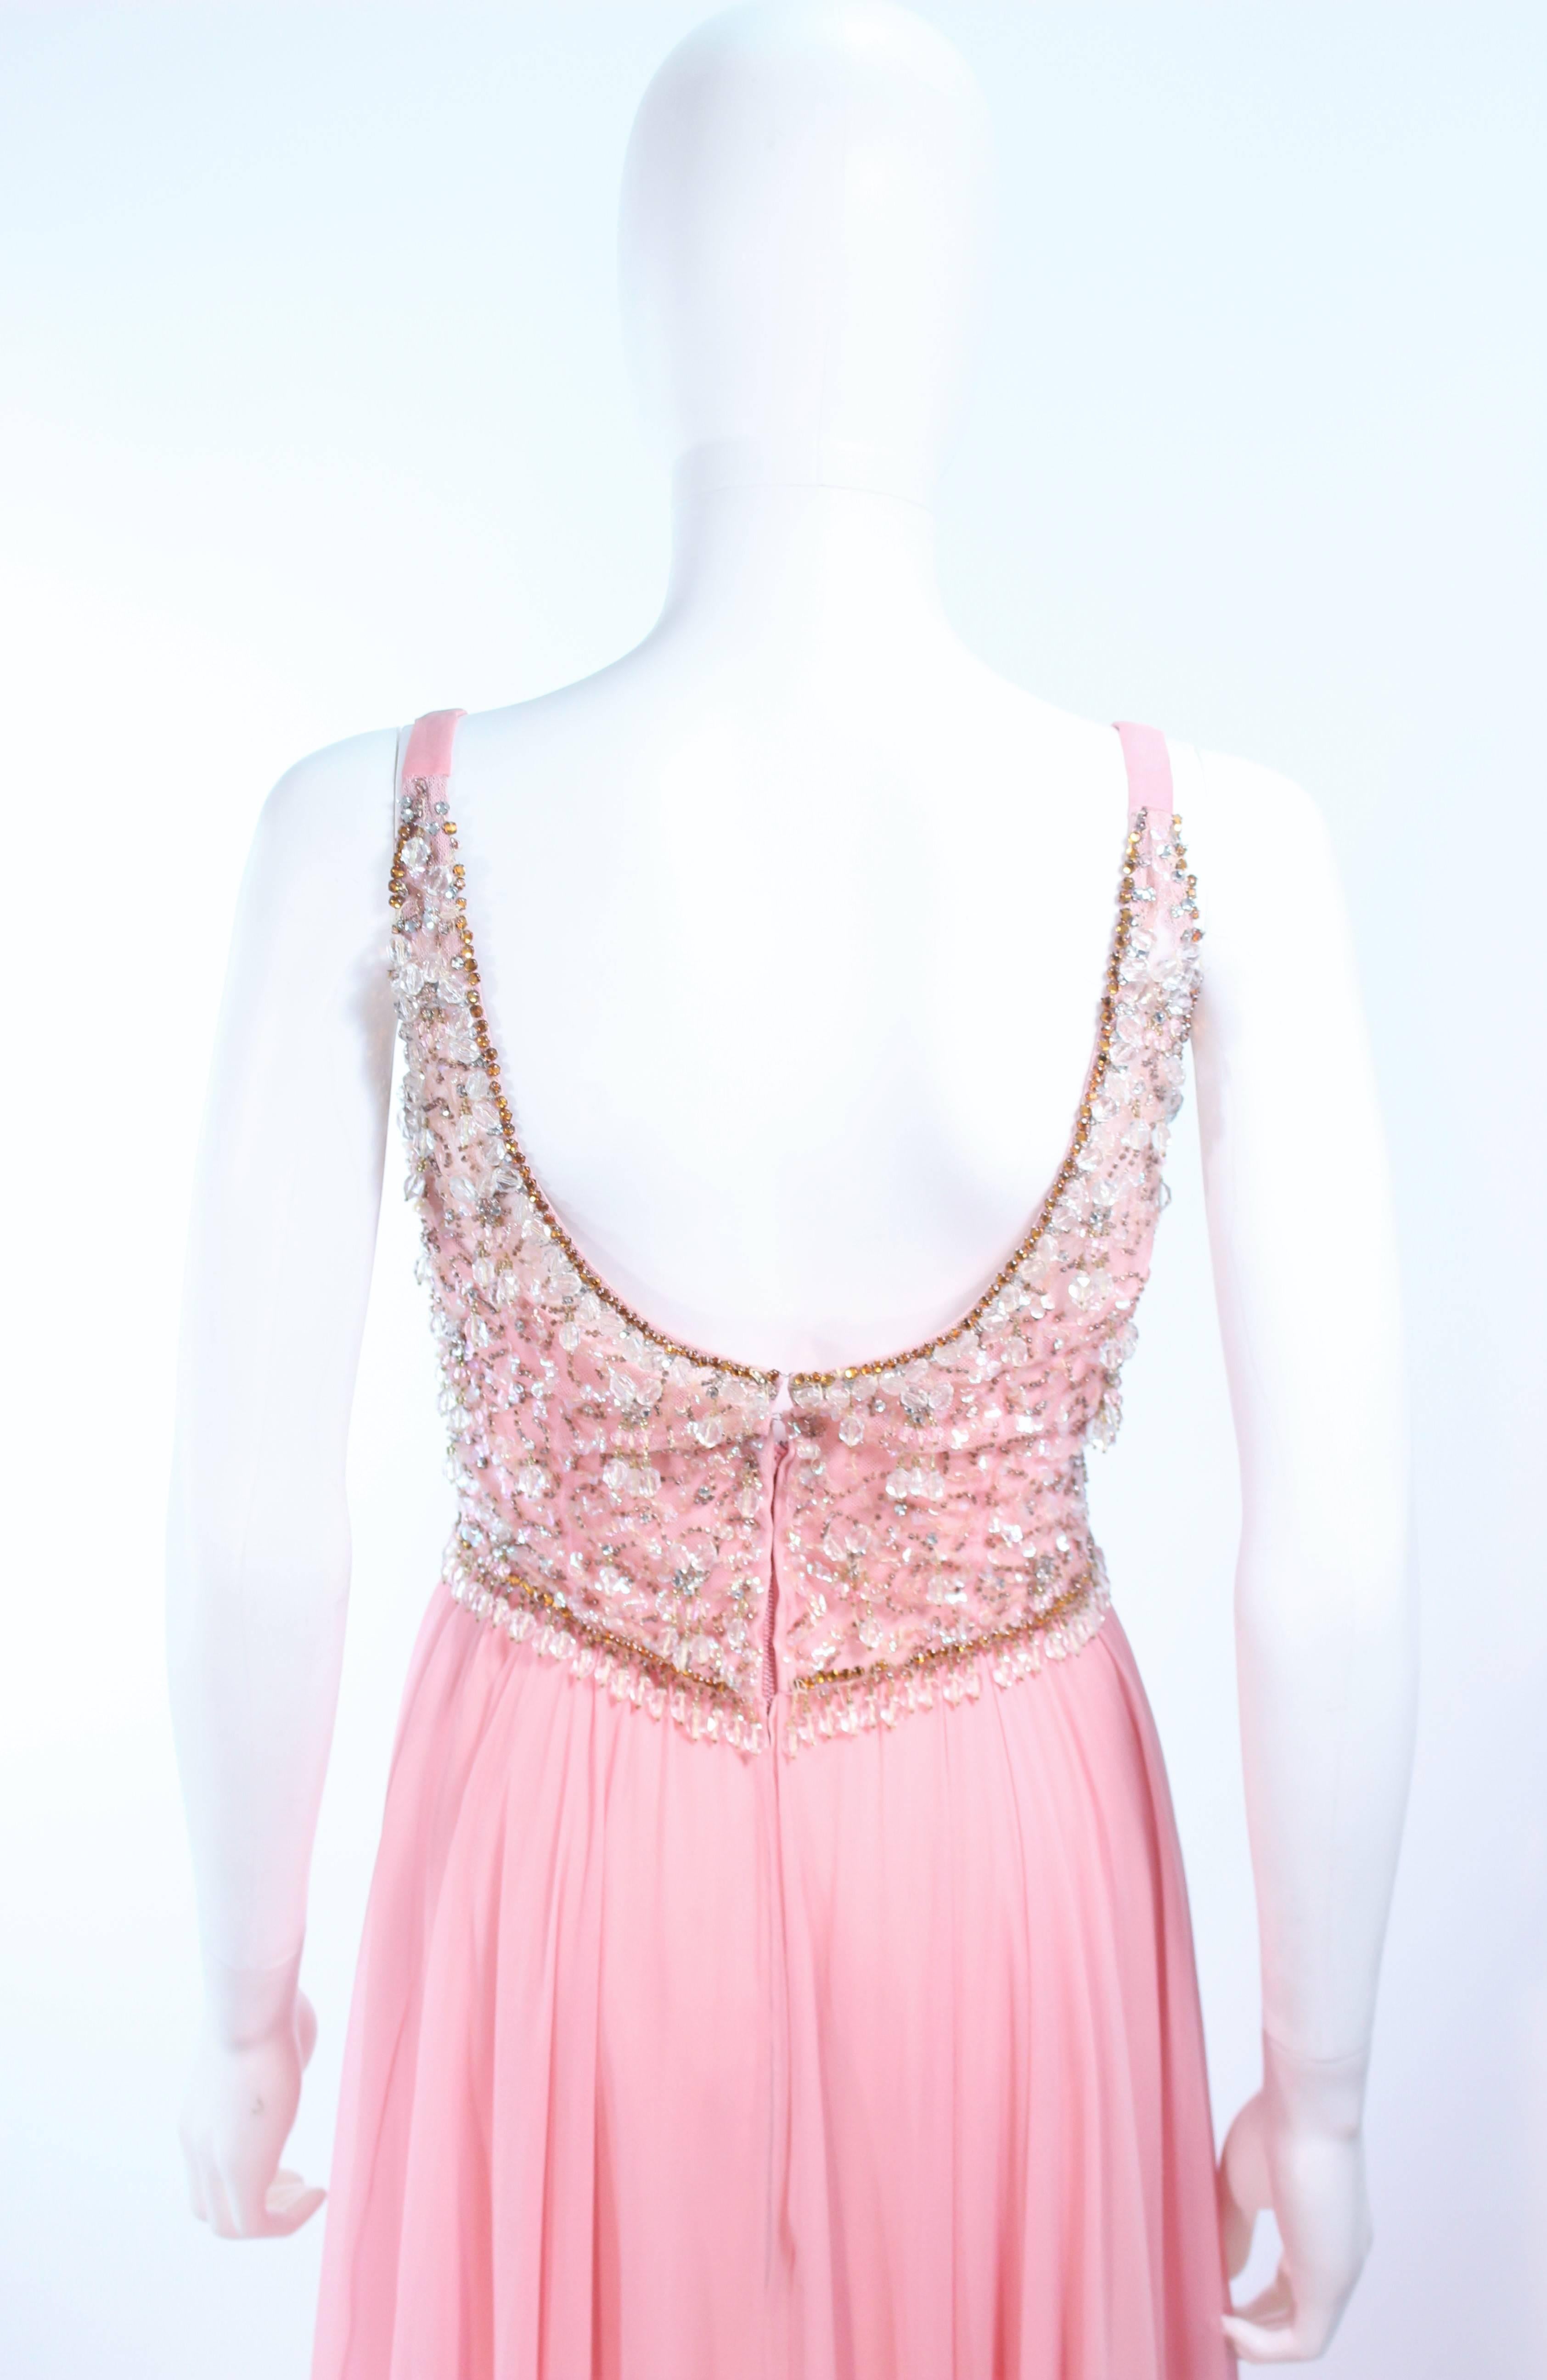 I. MAGNIN 1960's Hand Beaded Pink Chiffon Gown Size 4 For Sale 3